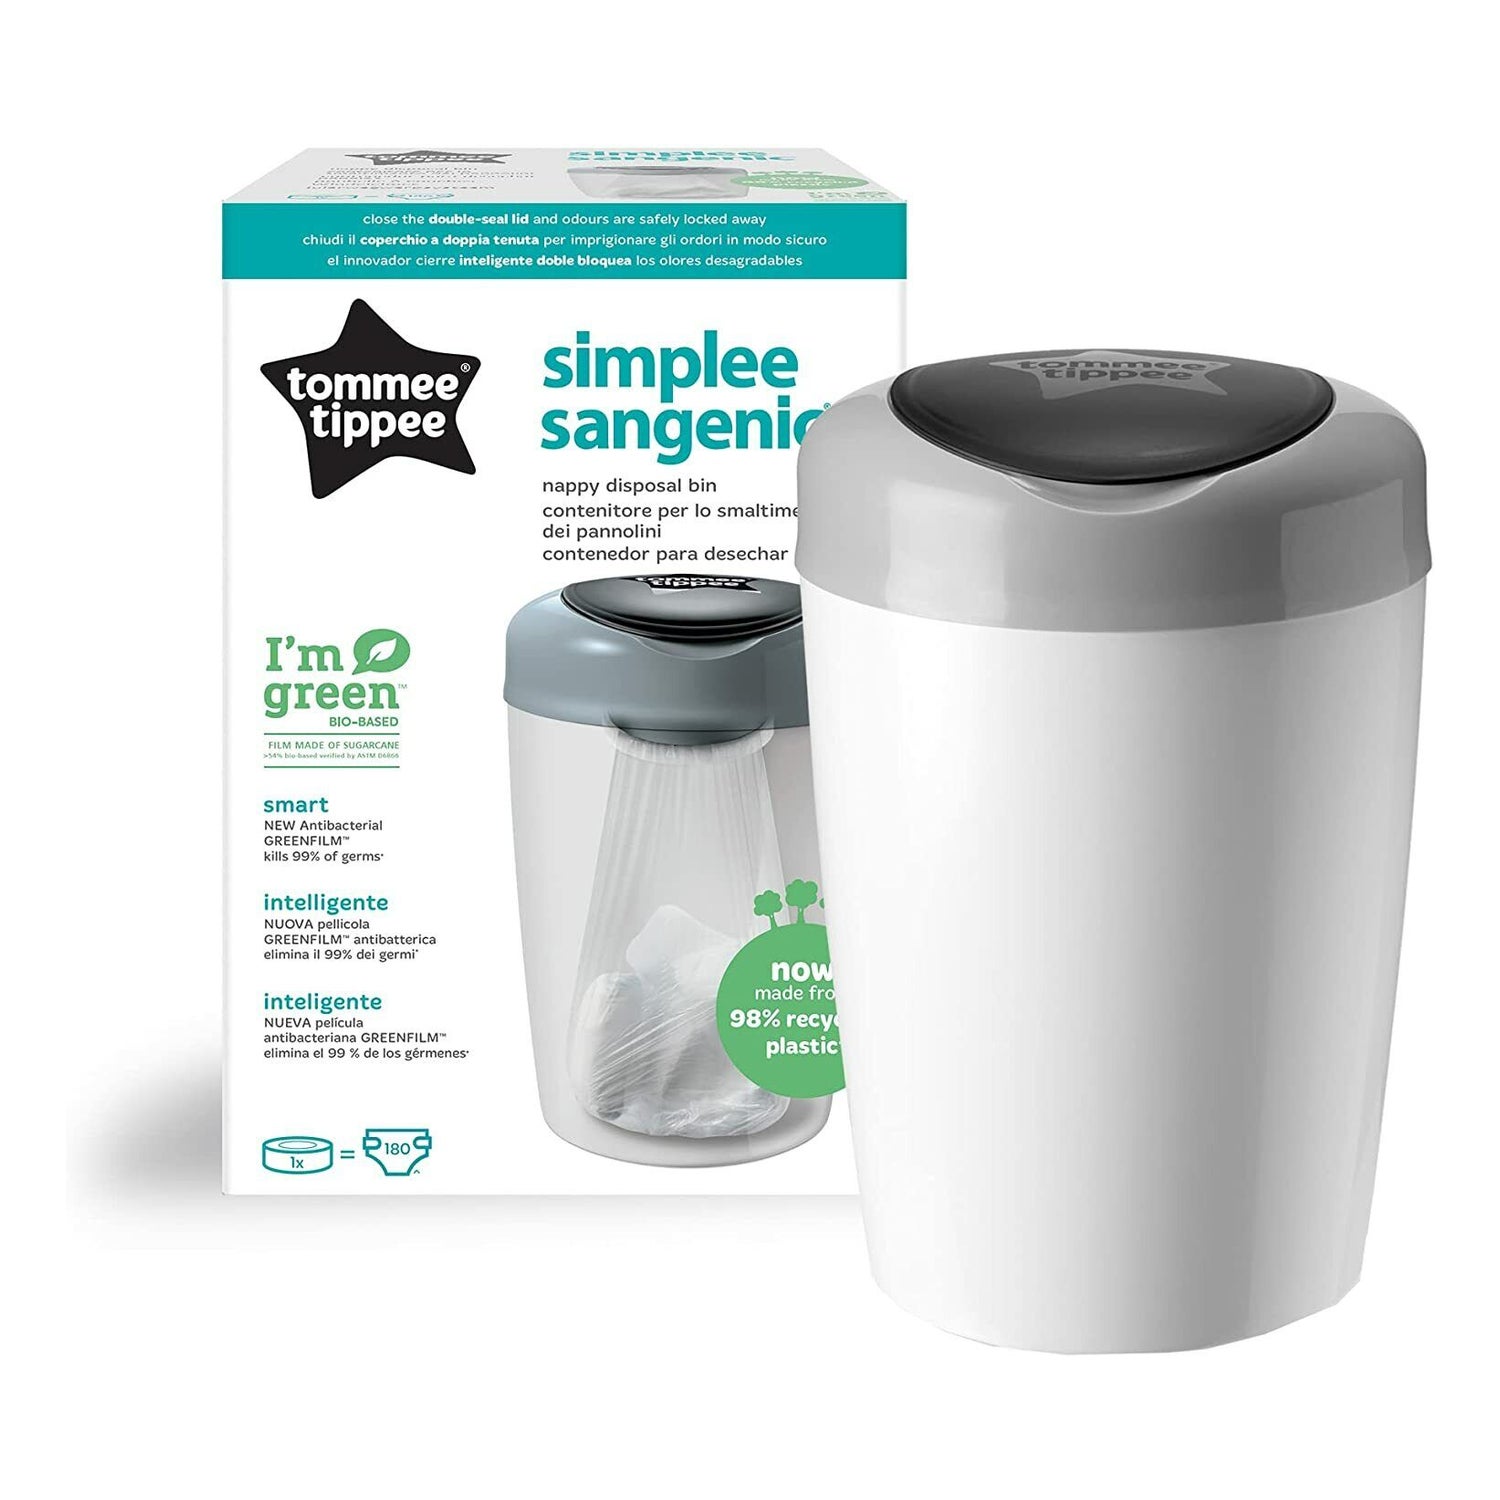 Tommee Tippee Grey Container | PromoFarma